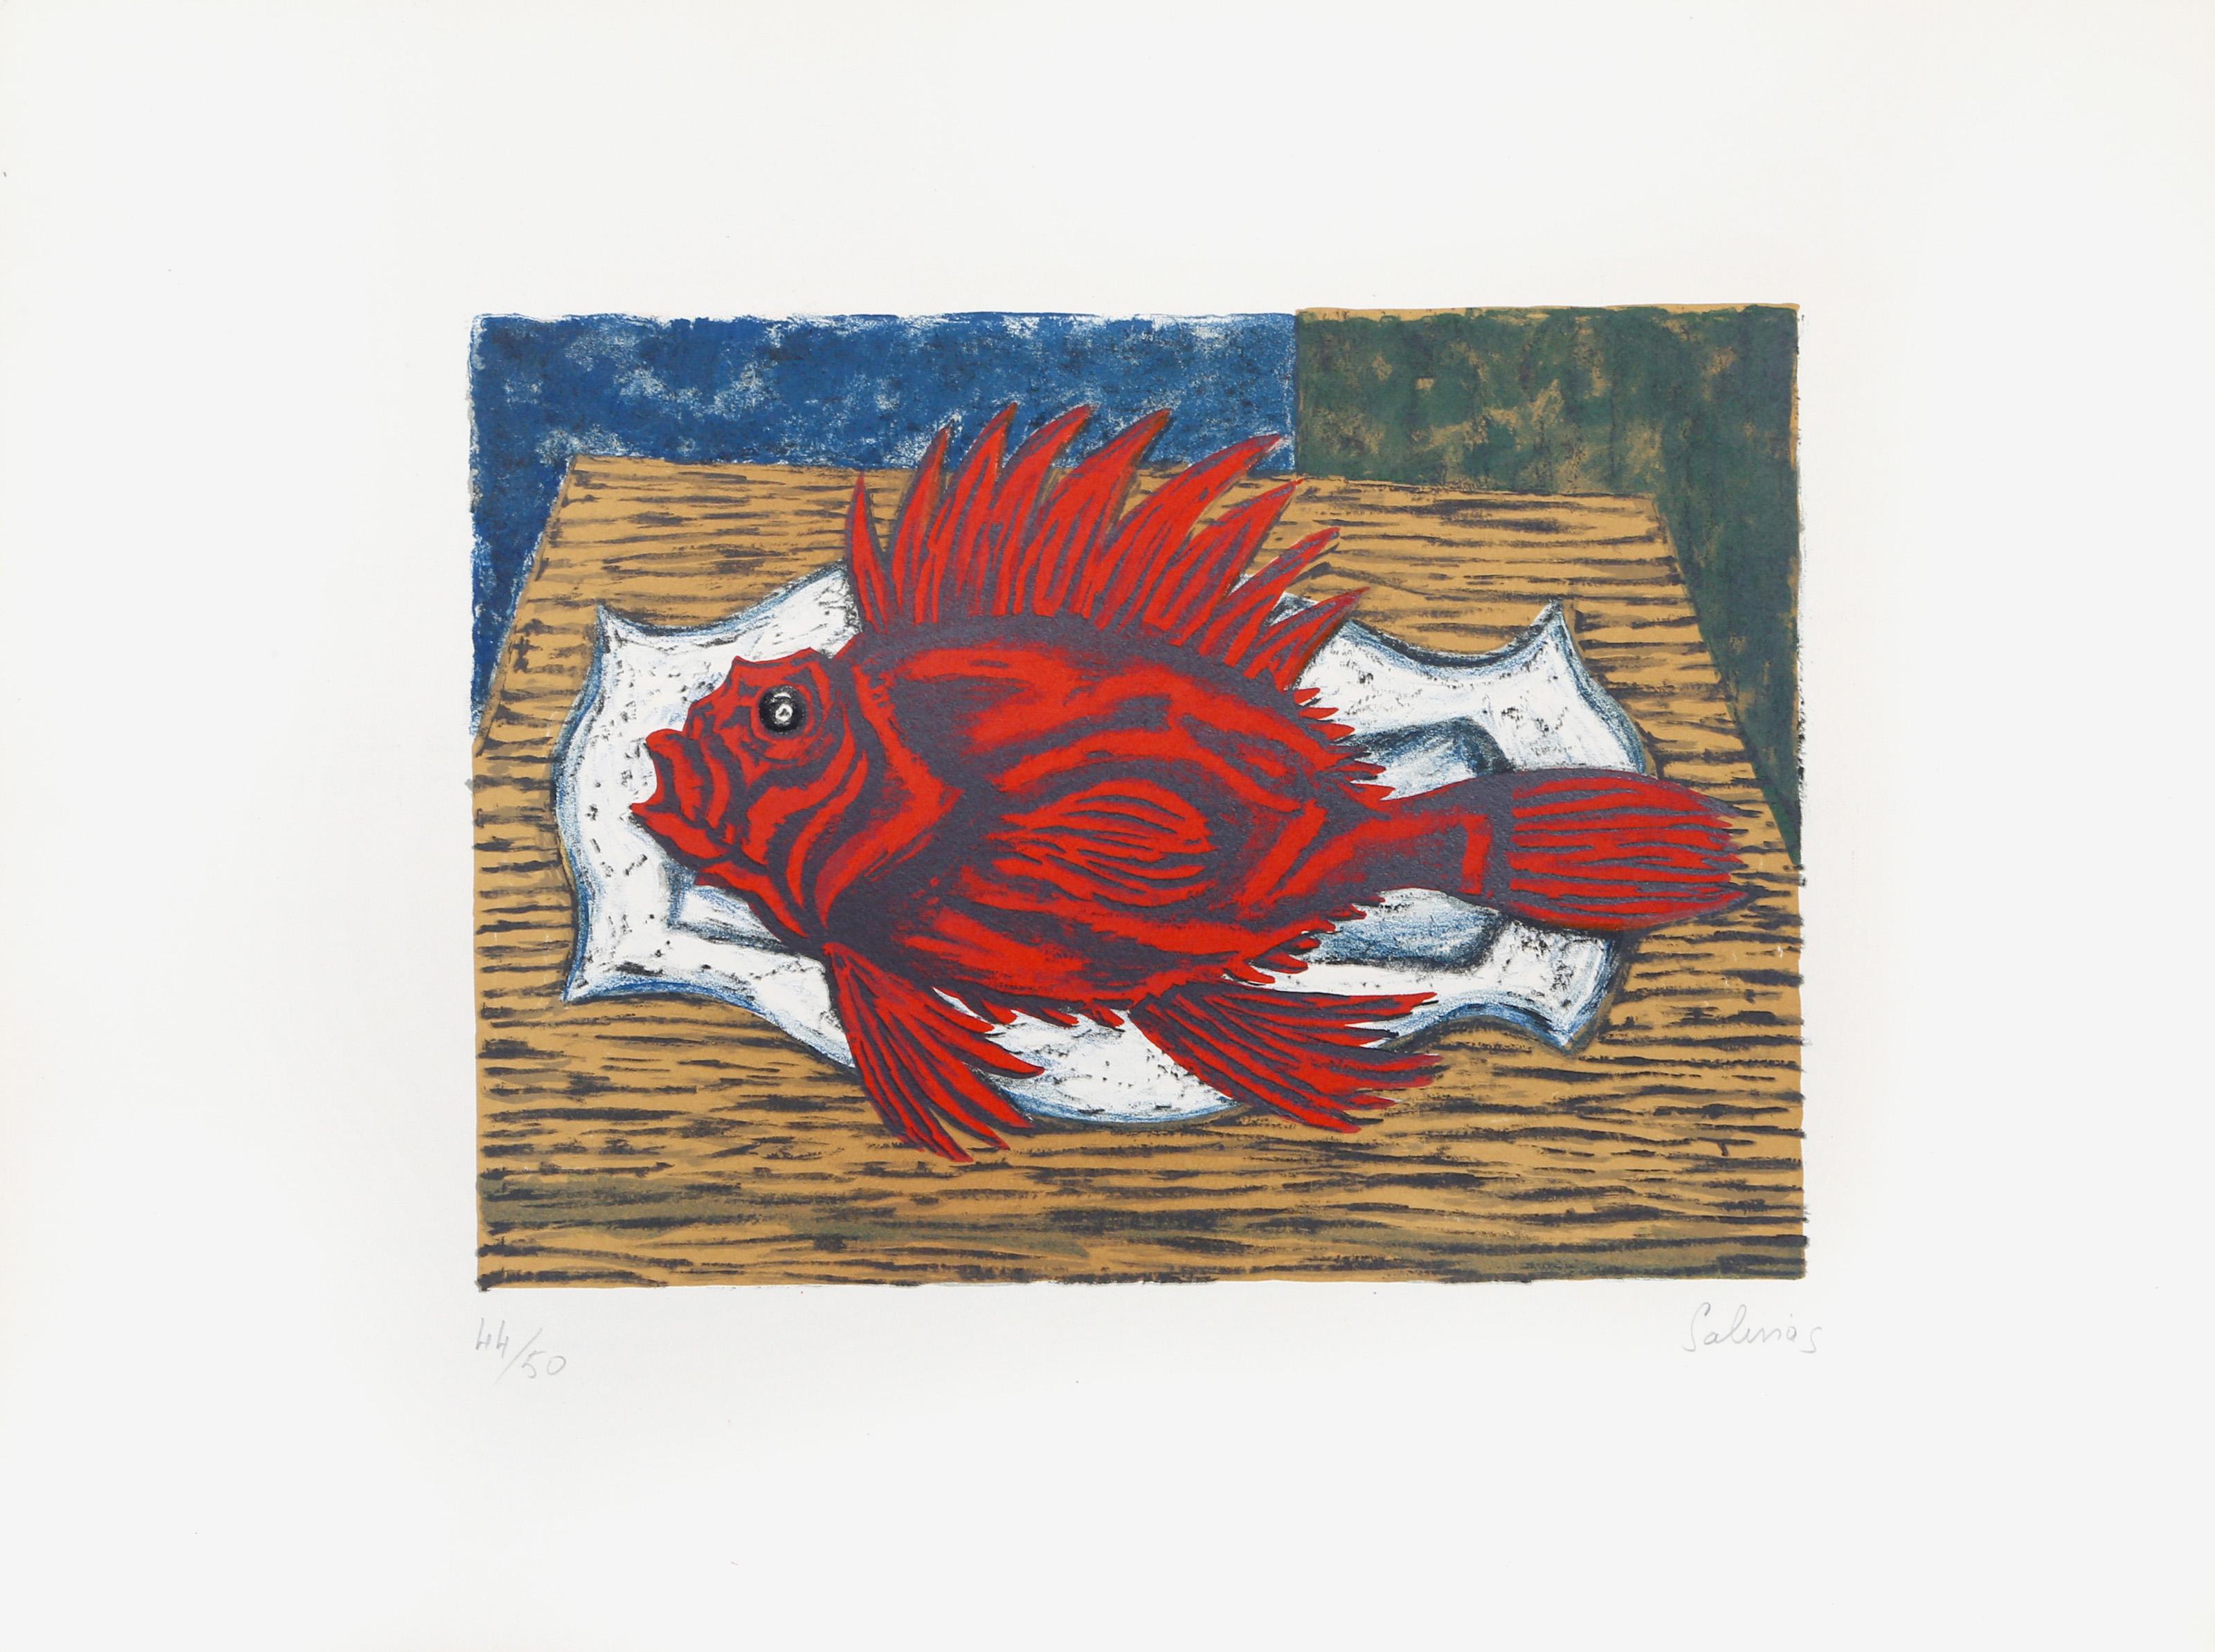 Laurent Marcel Salinas, Egyptian/French (1913 - 2010) -  Un Poisson Rouge. Year: circa 1980, Medium: Lithograph, signed and numbered in pencil, Edition: 50, Image Size: 10 x 13 inches, Size: 17  x 22 in. (43.18  x 55.88 cm) 